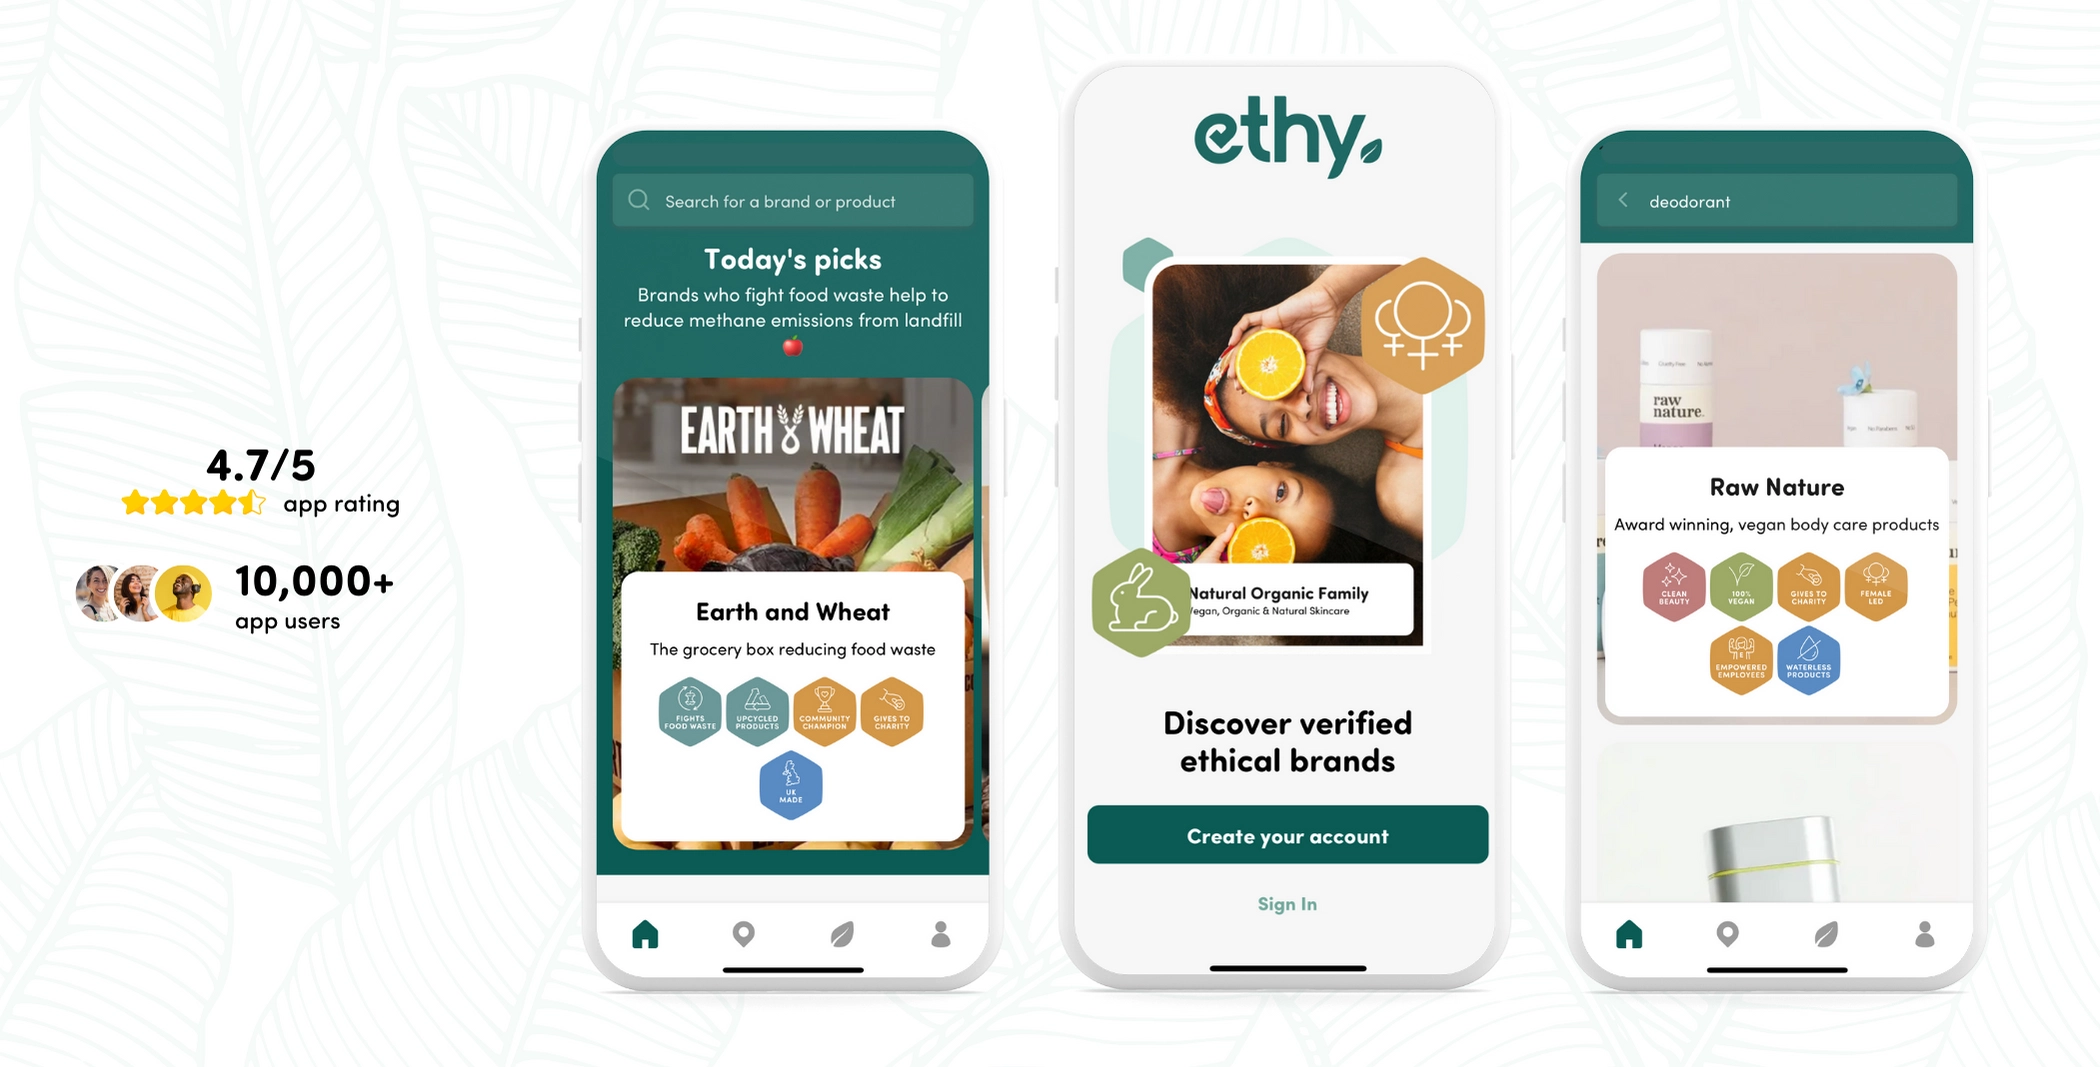 Increase your reach and connect with conscious consumers through ethy’s top-rated apps and website.